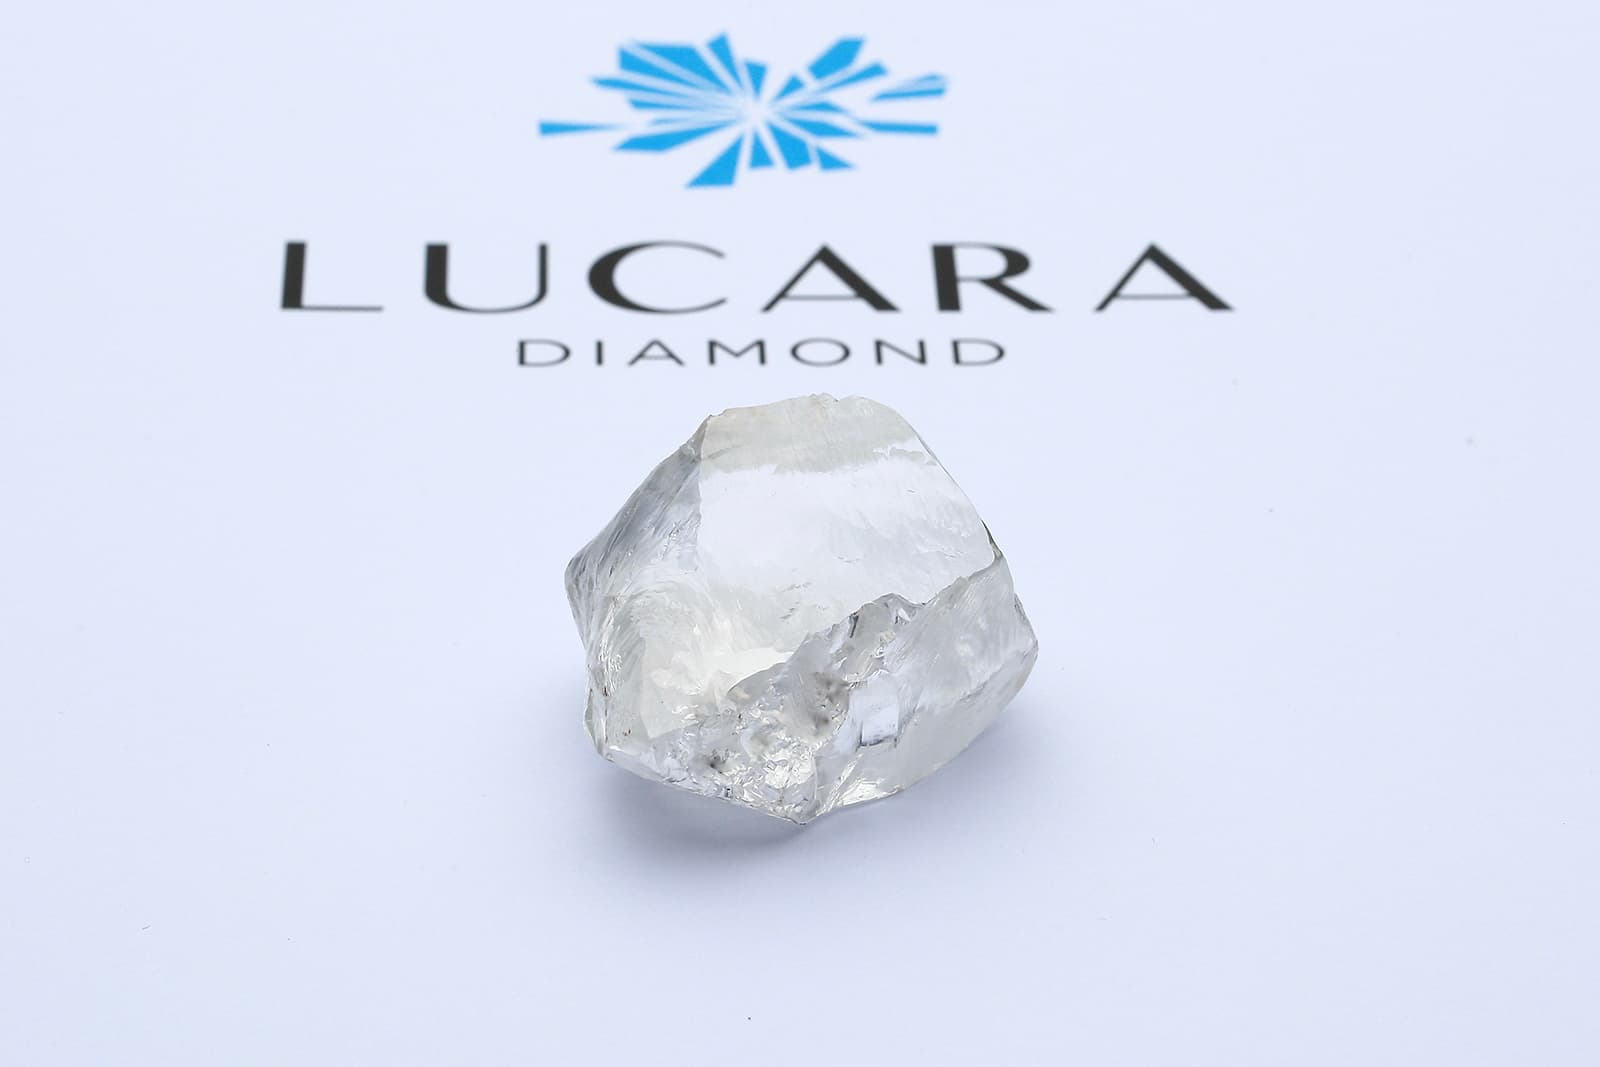 The most recent diamond discovery in our top 10: a 549-carat diamond recovered in Botswana